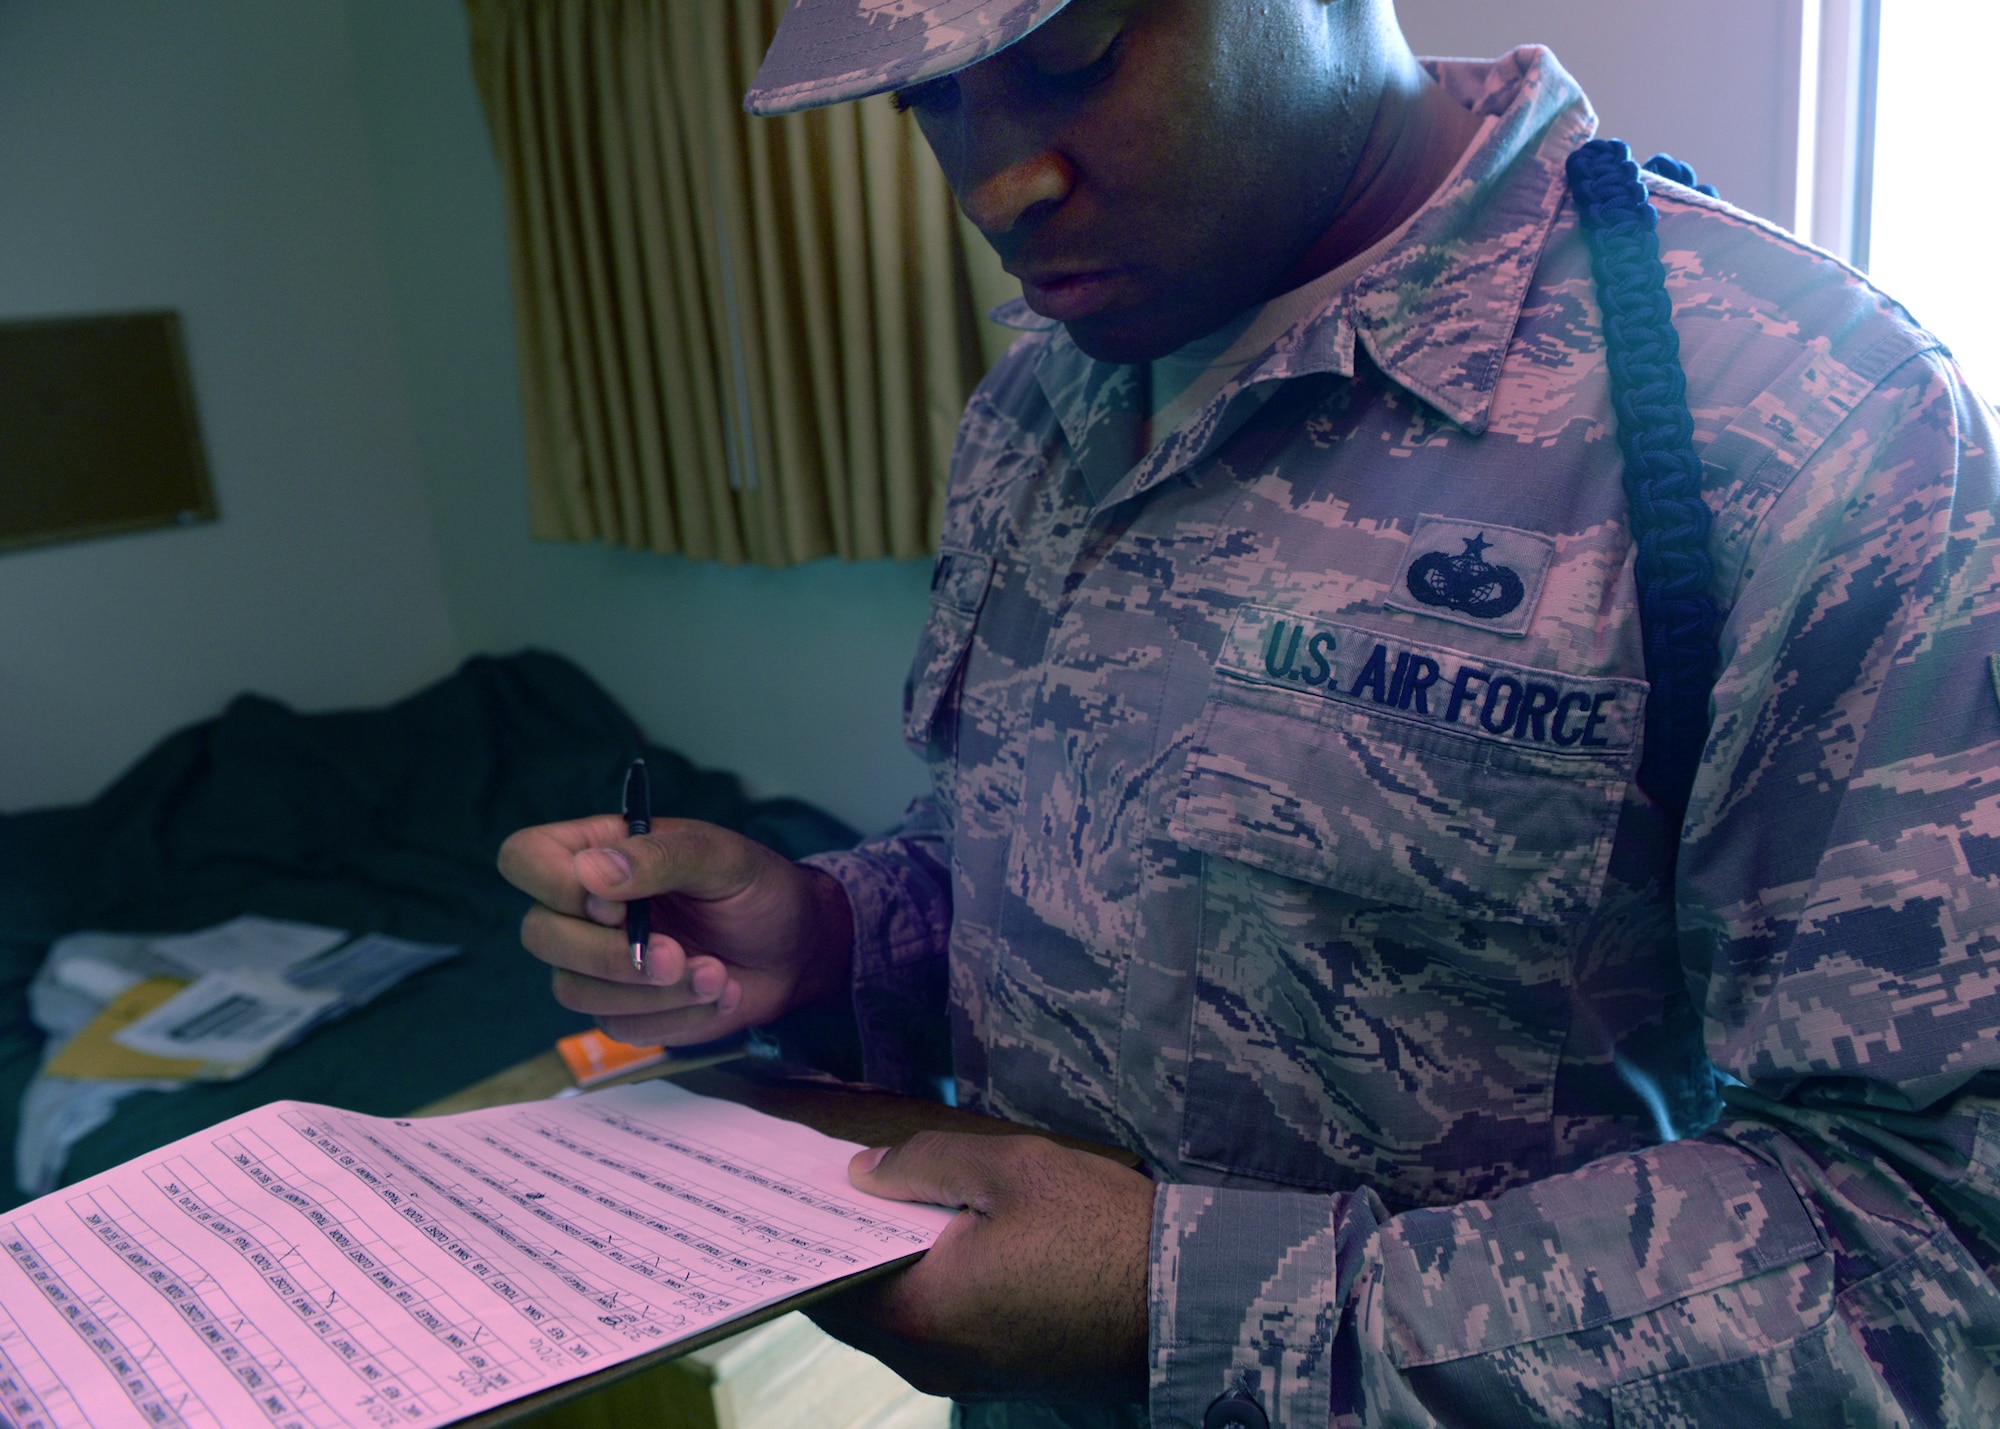 ALTUS AIR FORCE BASE, Okla. – U.S. Air Force Tech. Sgt. Mark Smith, 97th Training Squadron military training leader, marks a checklist for room inspections, Dec 10, 2014. Room inspections are held regularly to ensure students are upholding military standards. (U.S. Air Force photo by Airman 1st Class Nathan Clark/Released)